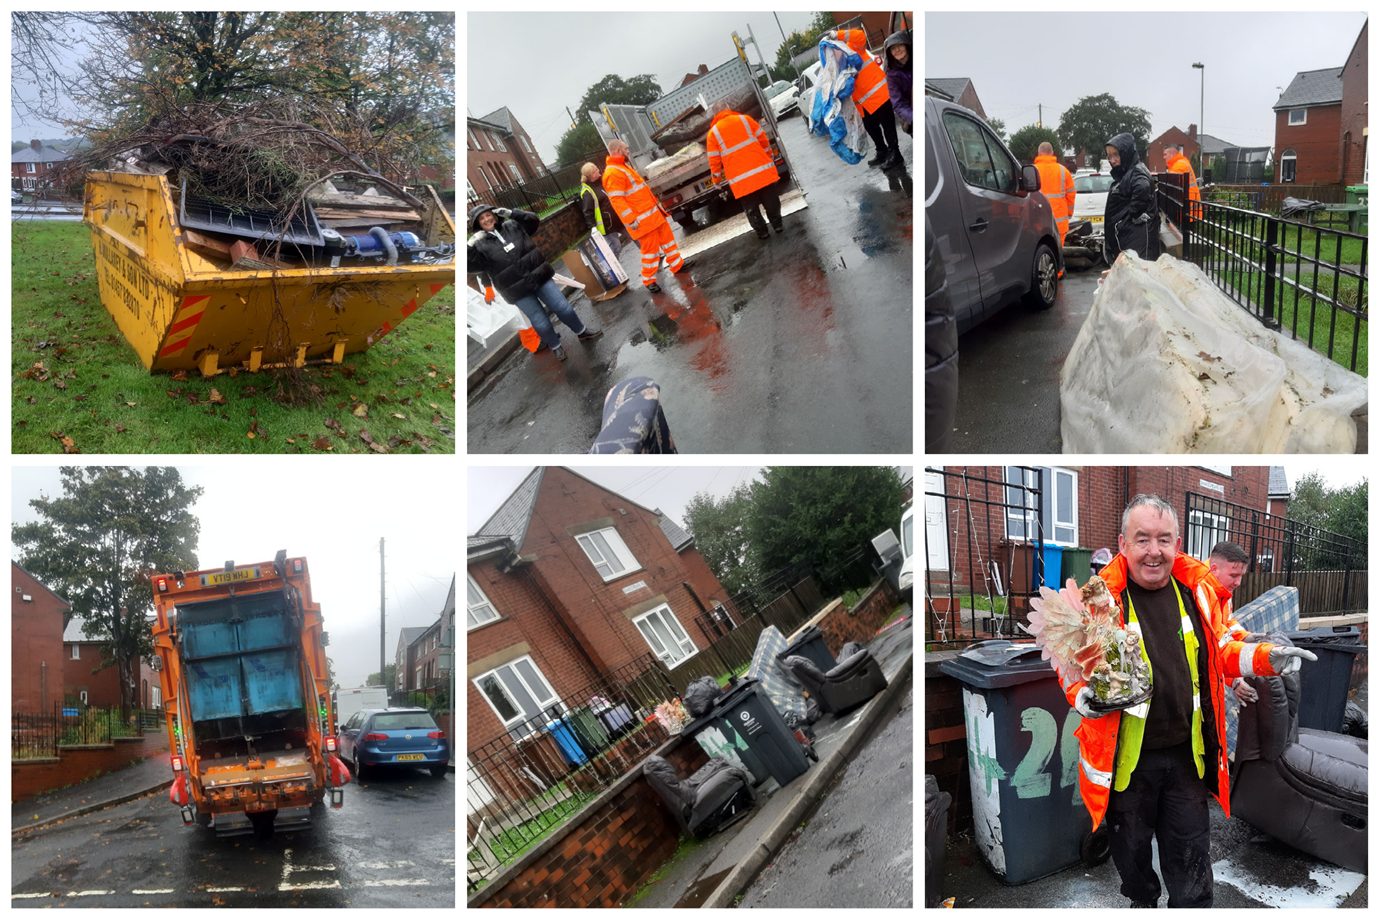 Free skips and kerbside waste collections to help customers get rid of rubbish and spruce up the street were the focus of our Environmental Day held on Shakespeare Rd, Derker on Wednesday 20 November 2021